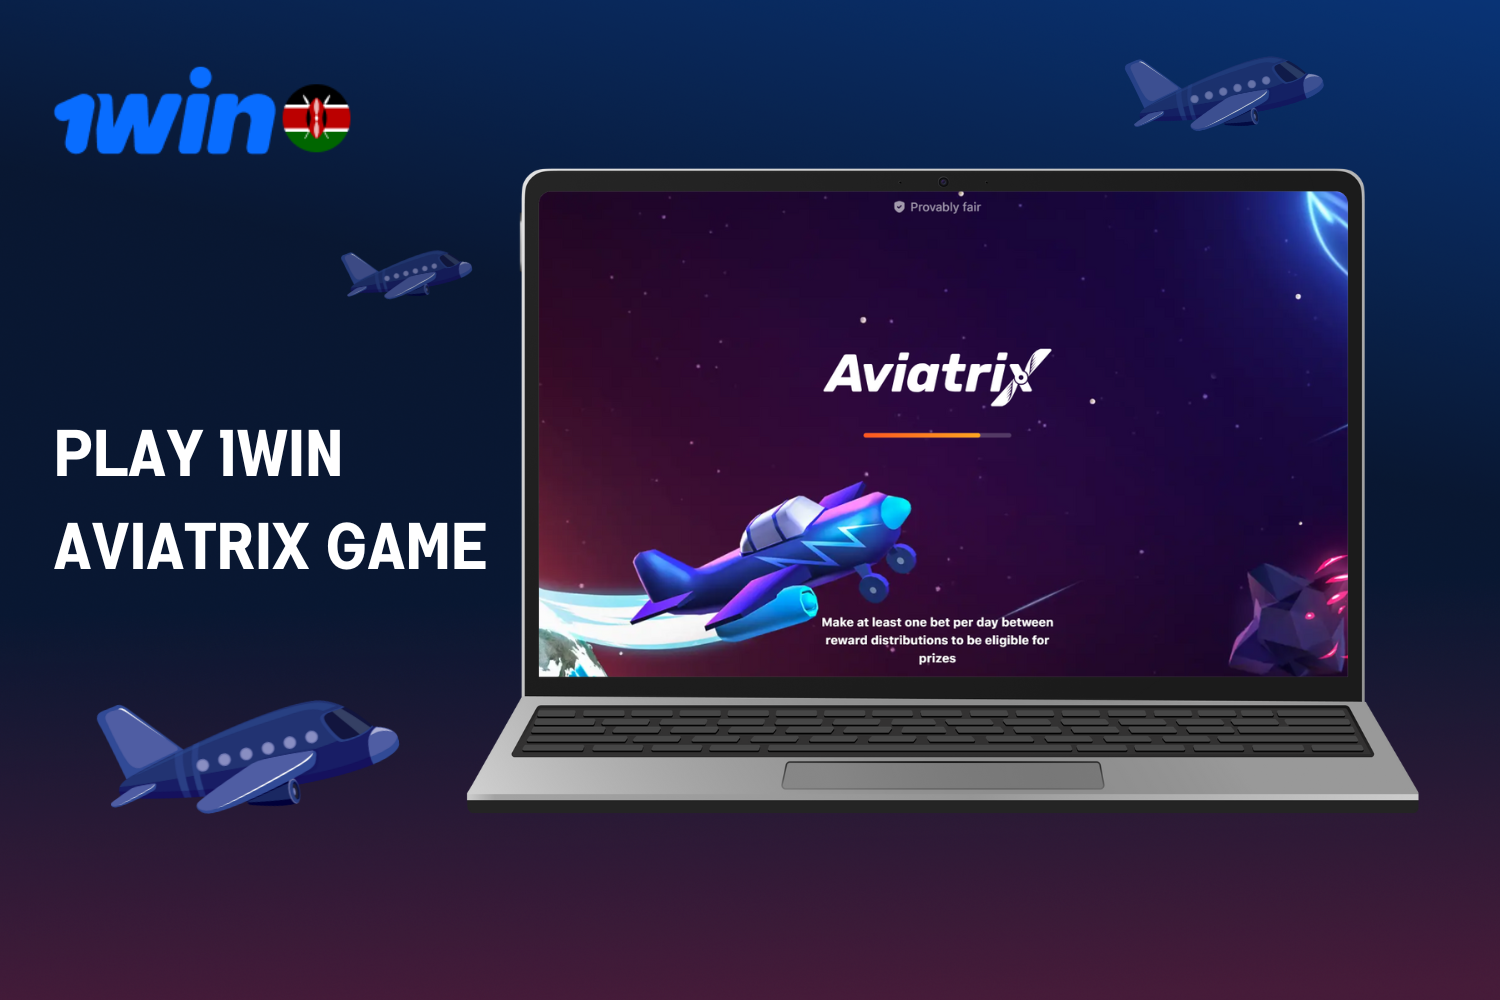 Aviatrix on 1win is a speed game available to every player in Kenya with the opportunity to win real money.